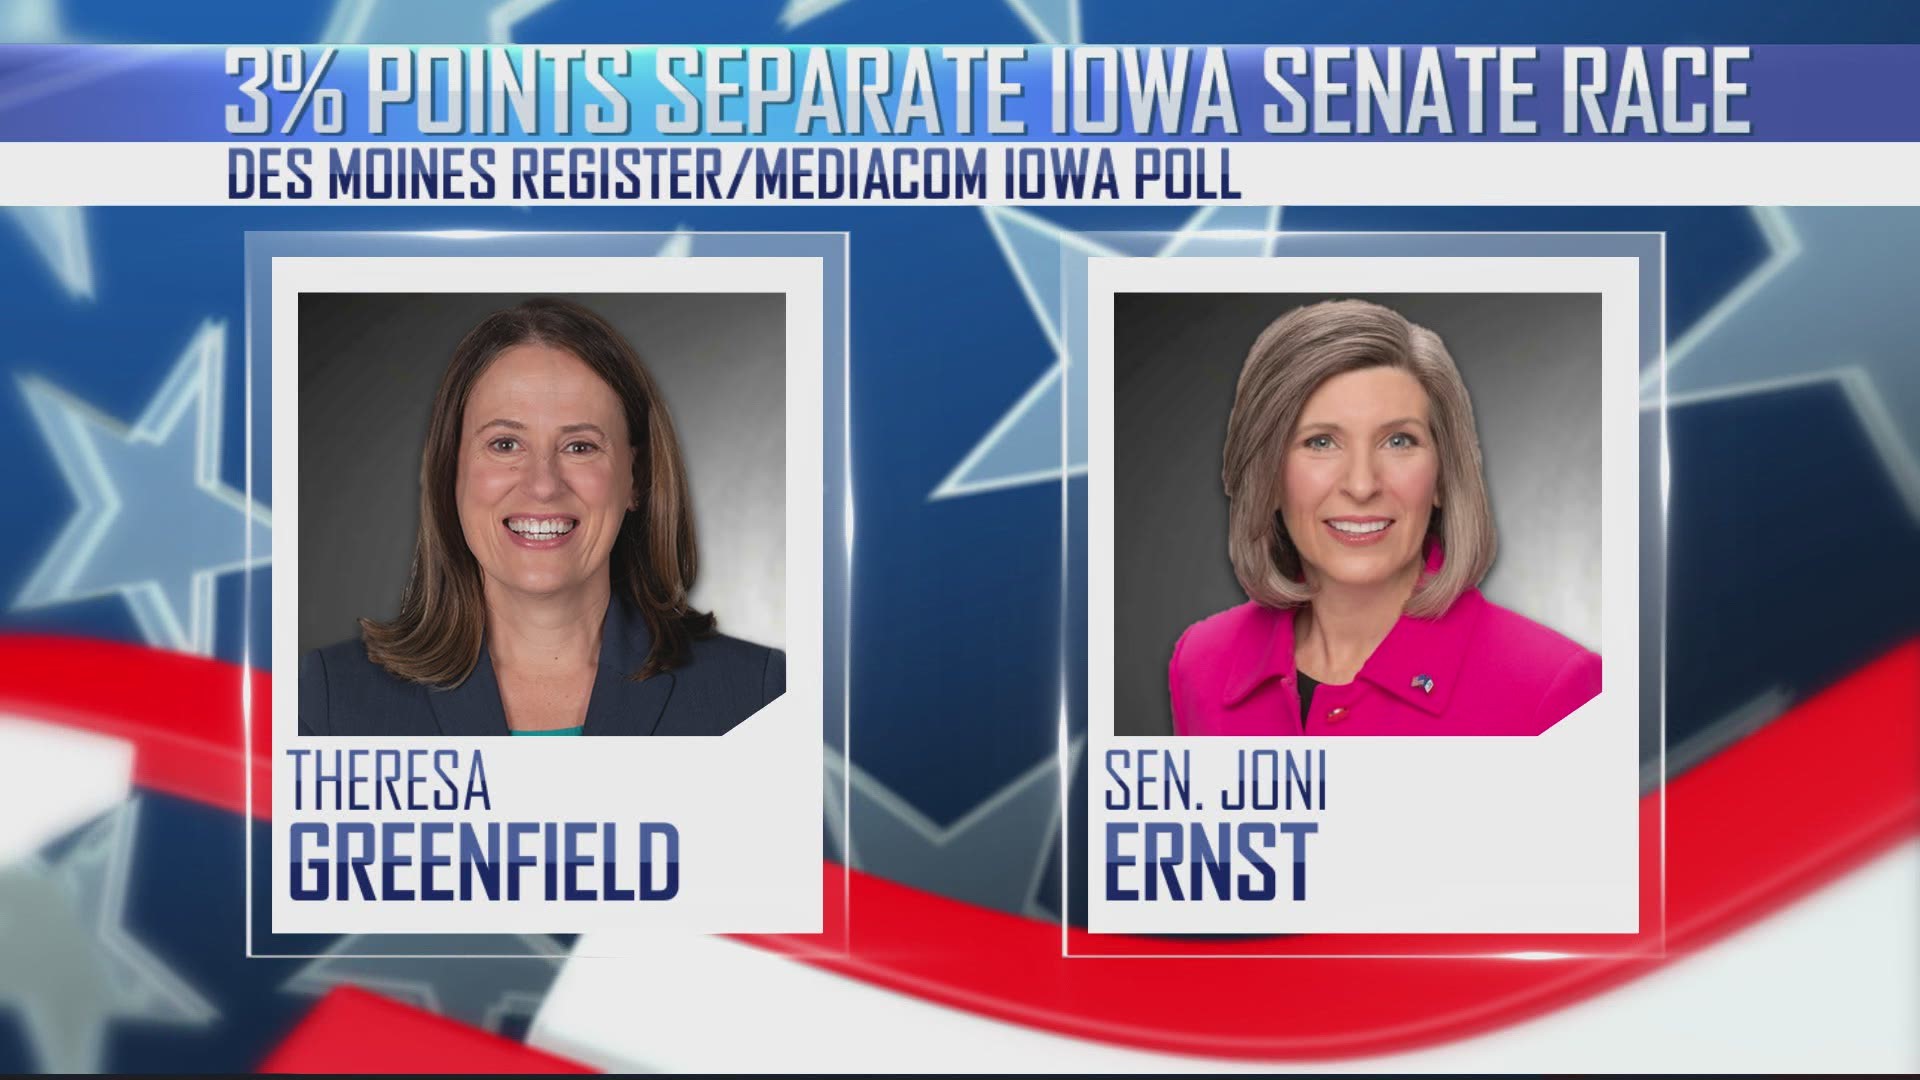 The latest poll released Saturday shows Greenfield leading 45% to 42% among likely voters against incumbent Republican Sen. Joni Ernst.